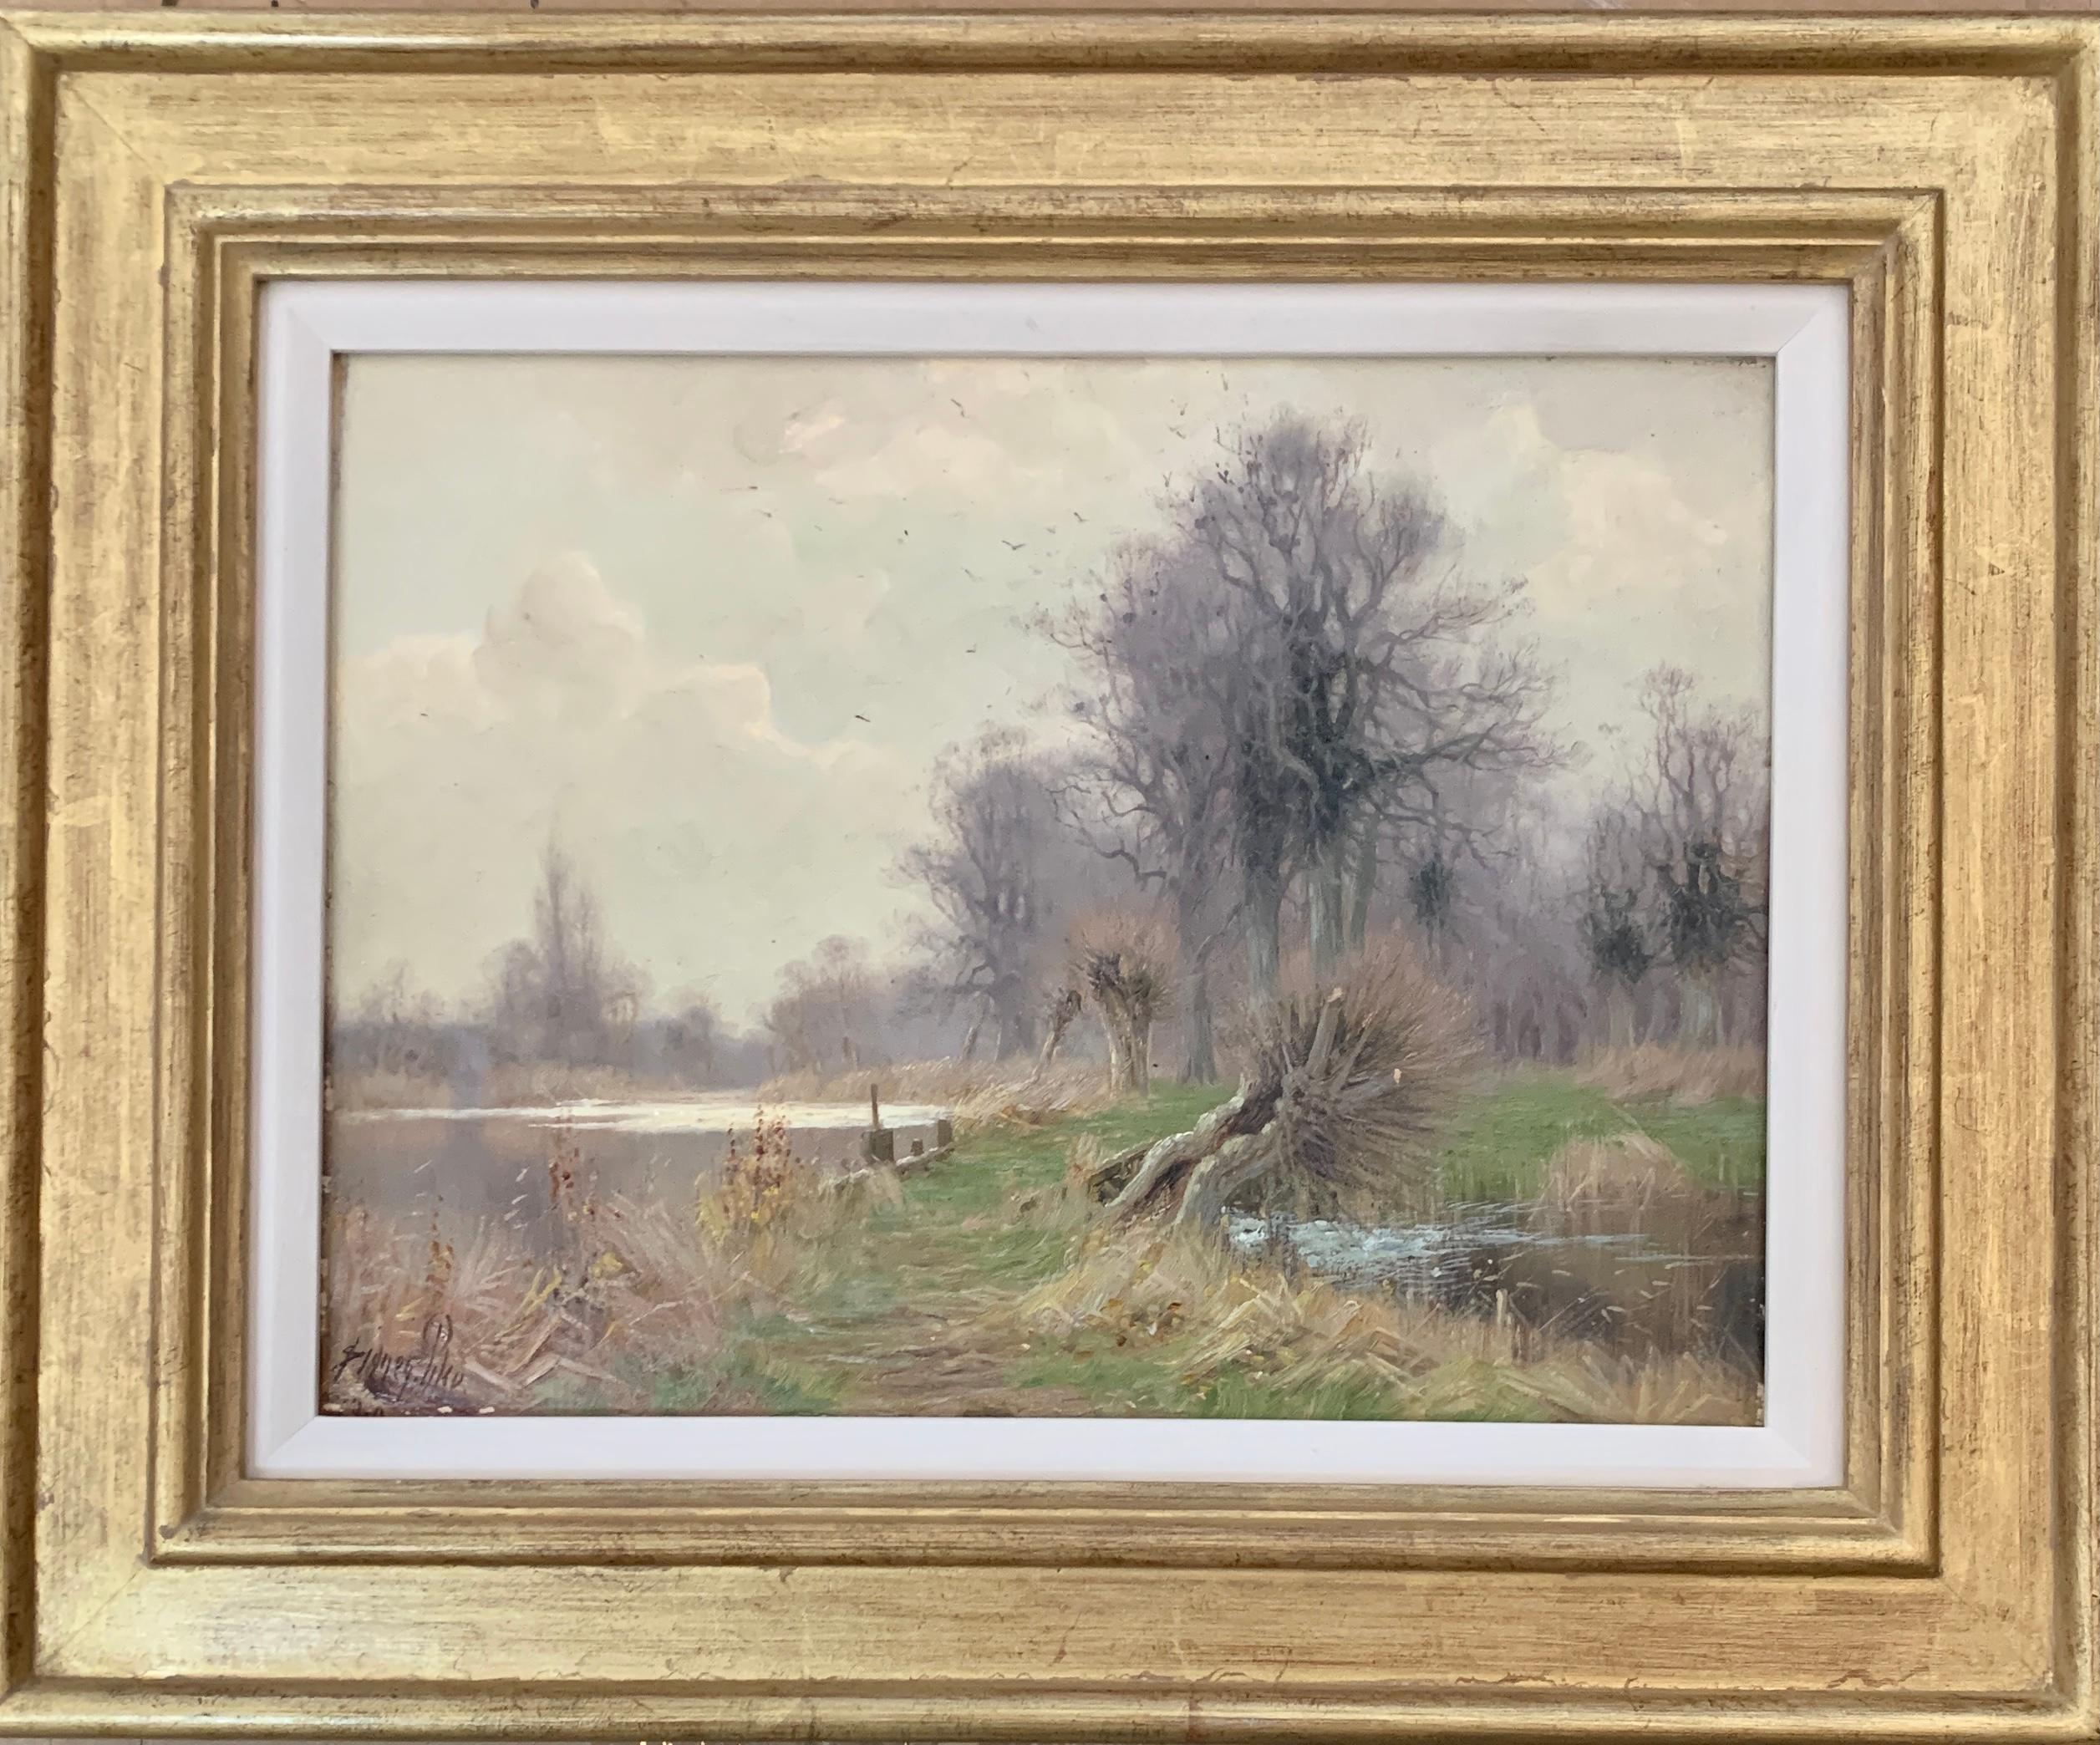 Sidney Pike Landscape Painting - Antique early 20th century English Autumn river landscape